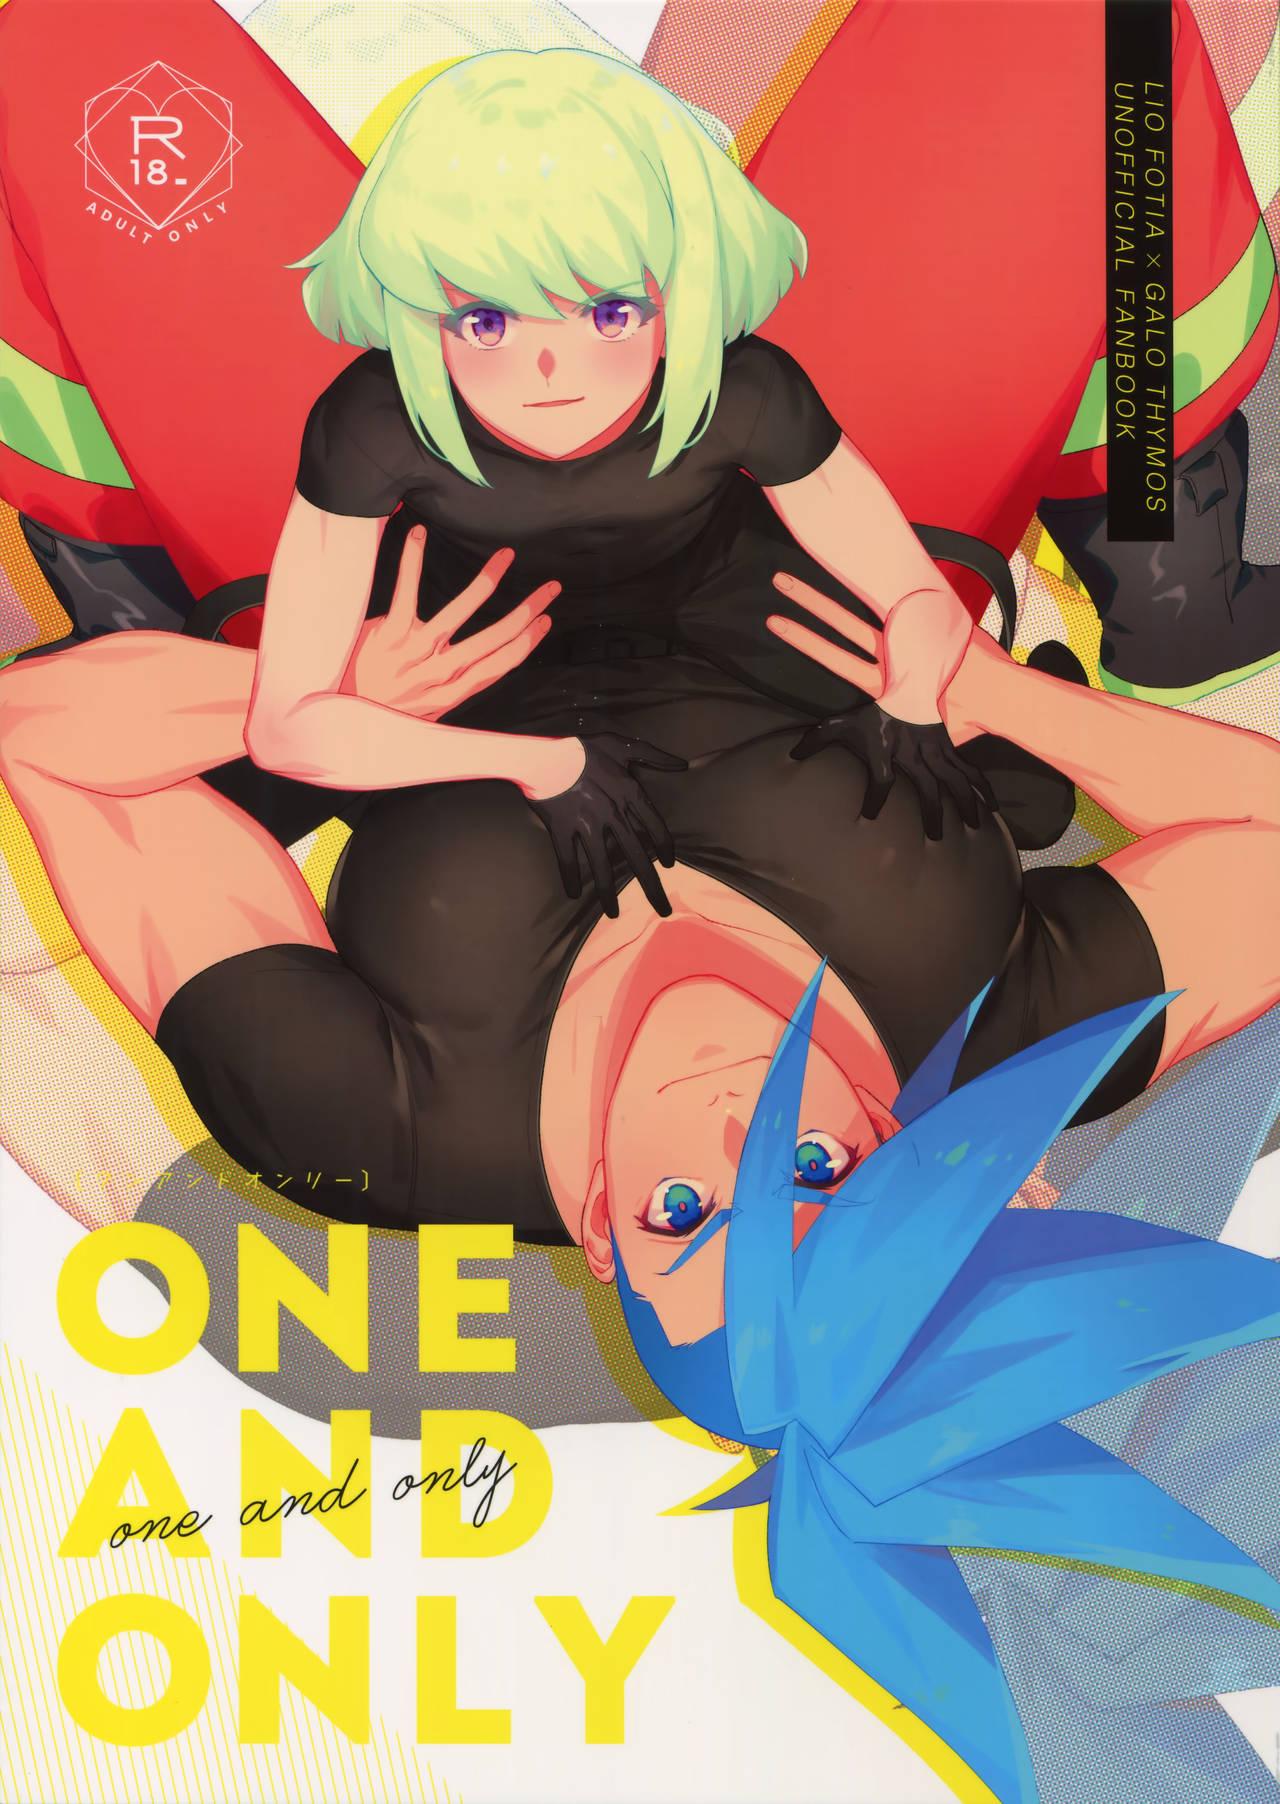 Jizz One and Only - Promare Porn Star - Page 1